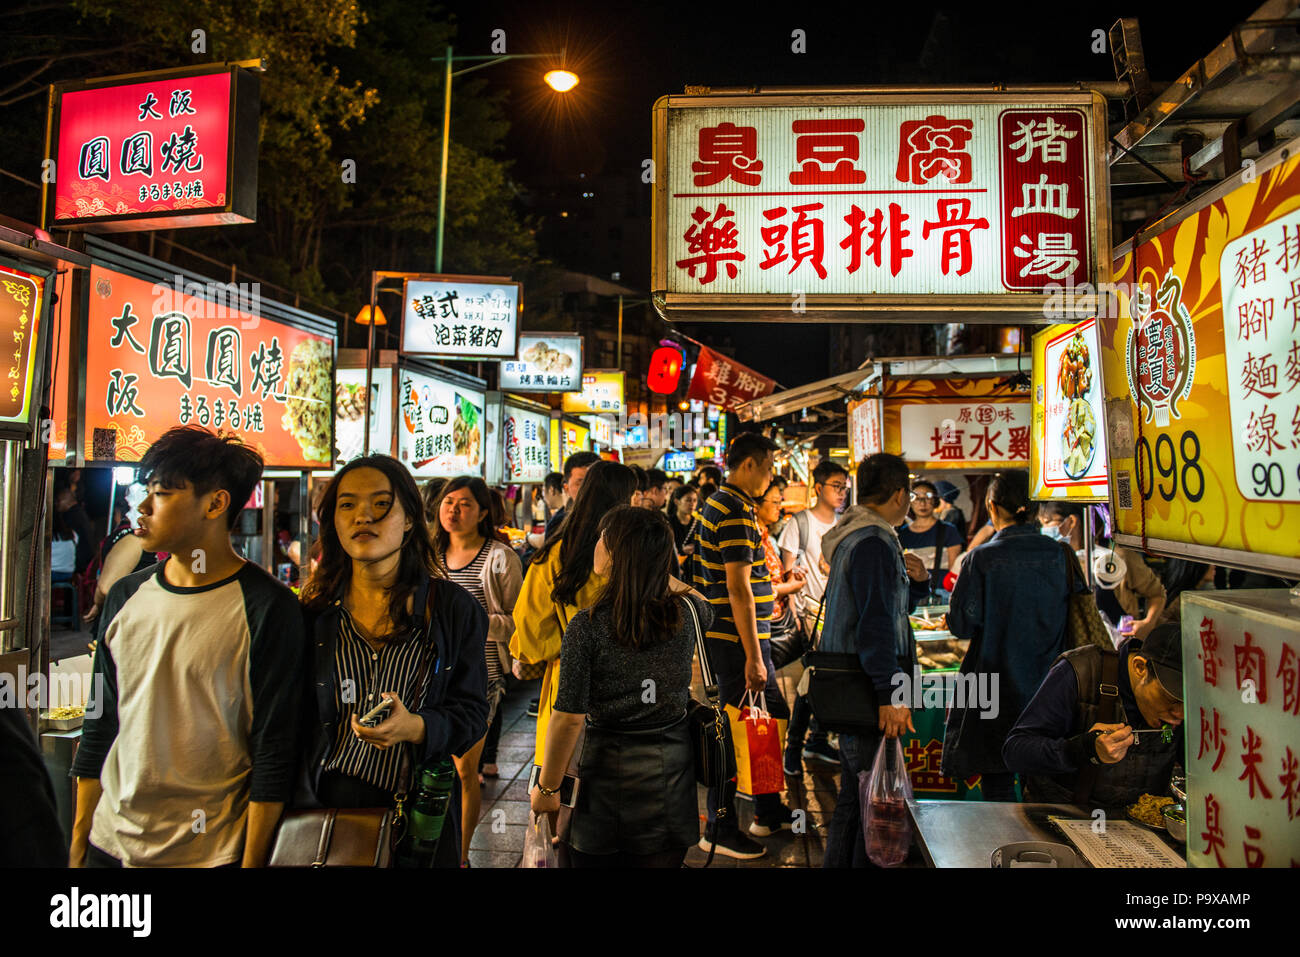 A bustling night food market in Taipei city, Taiwan, with many Mandarin signs and people walking past. Stock Photo